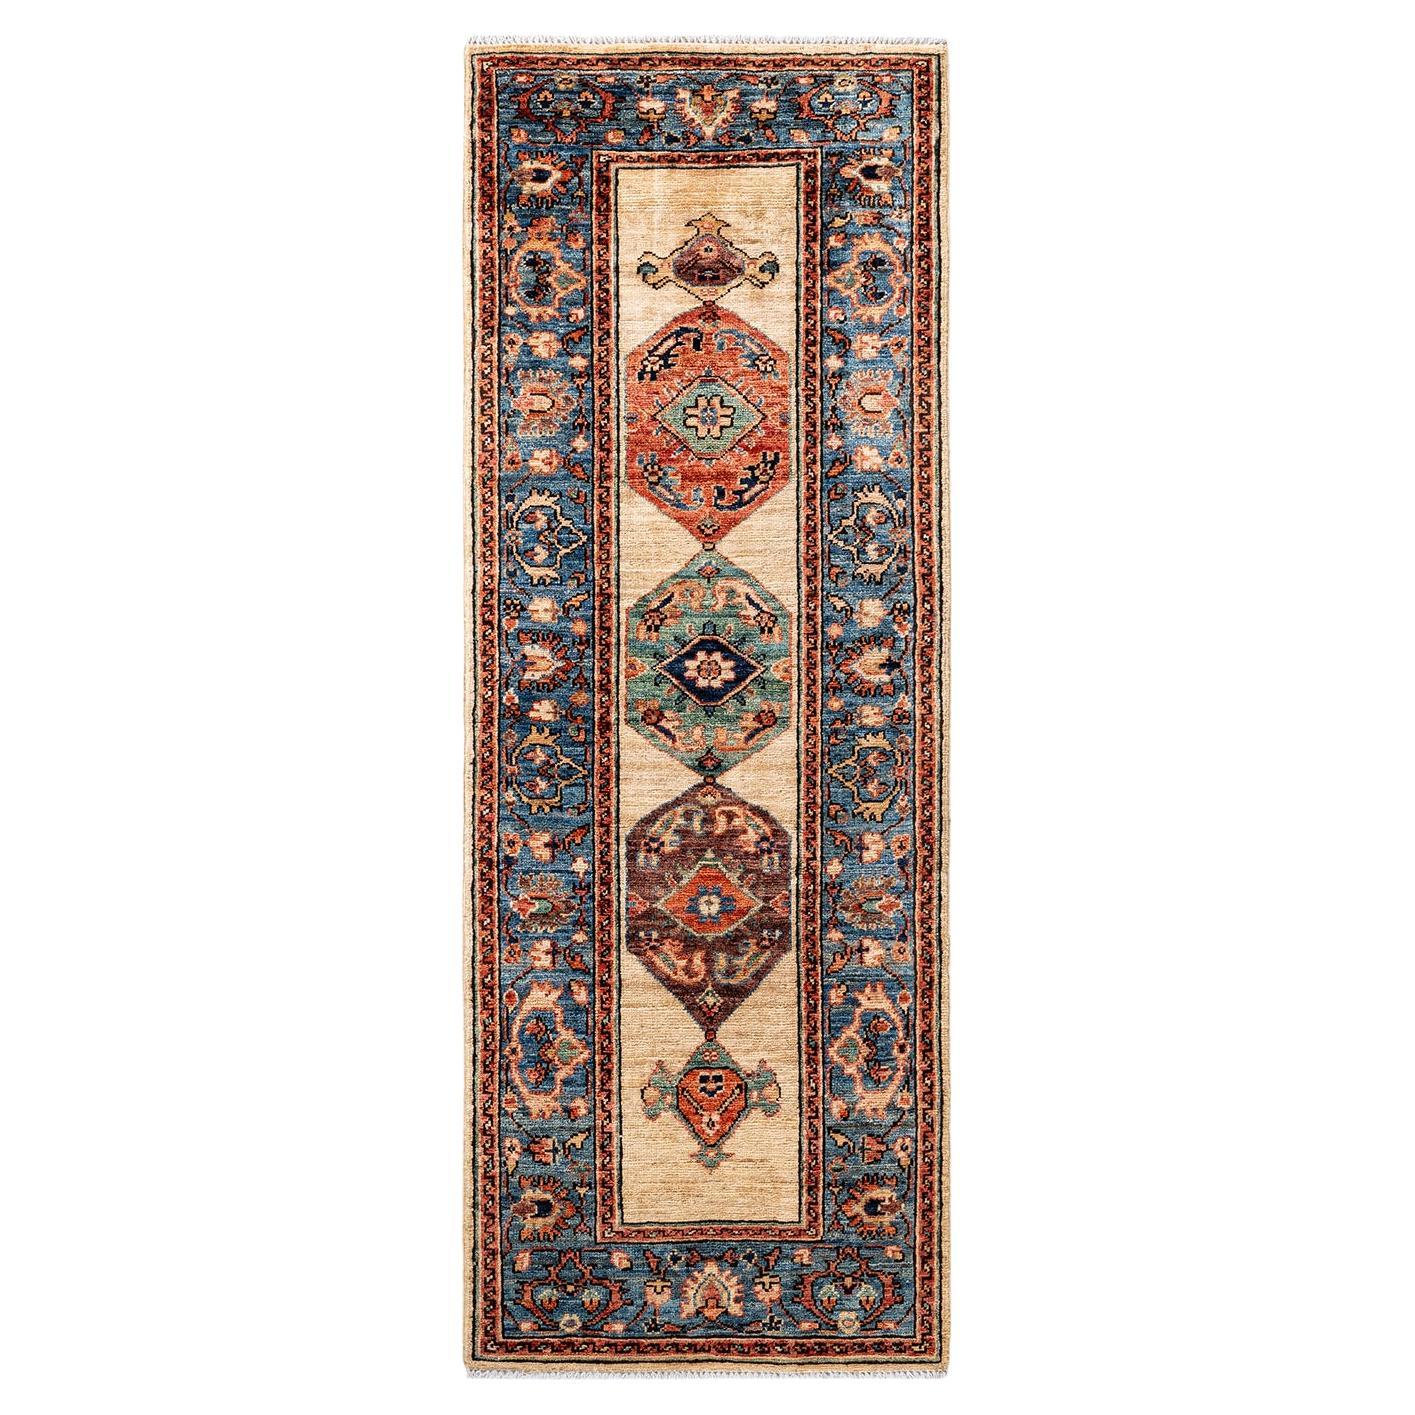 Serapi, One-of-a-Kind Hand-Knotted Runner Rug, Ivory